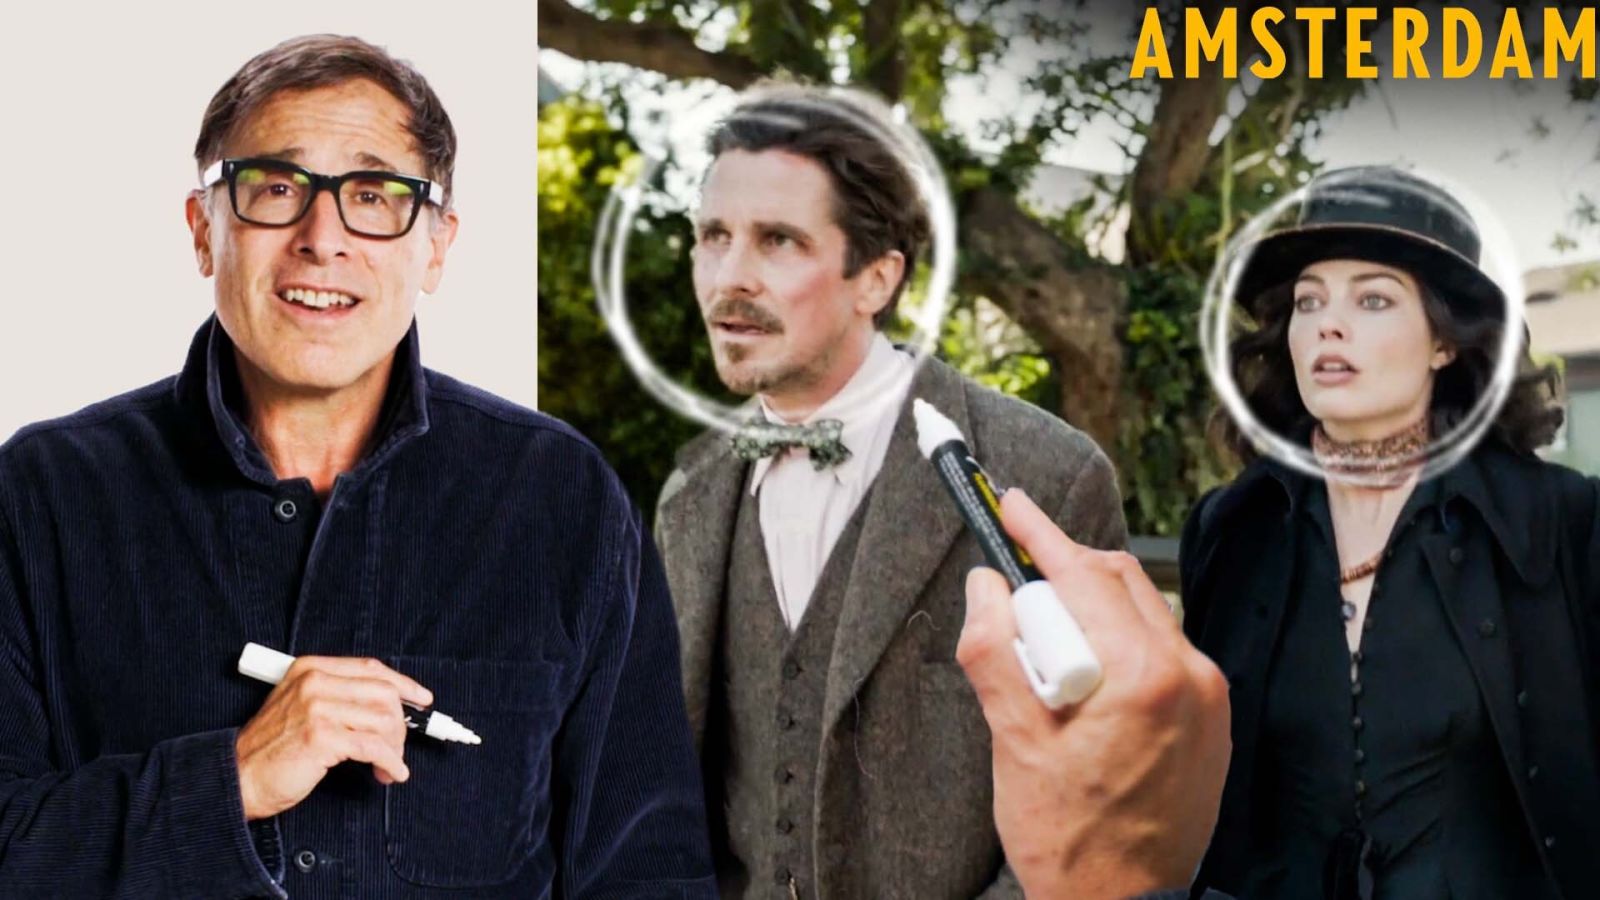 David O. Russell Breaks Down a Scene from 'Amsterdam'